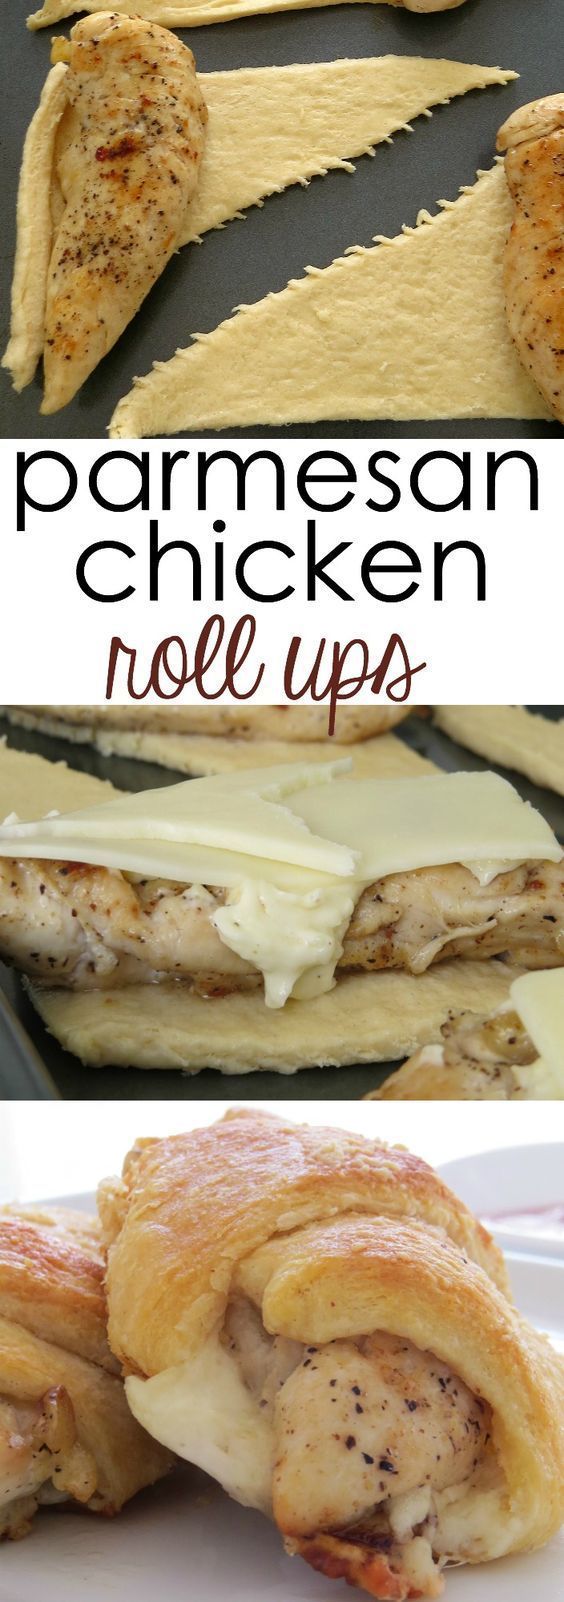 Looking for a quick and easy chicken dinner idea? These Parmesan Chicken Roll Ups will be one of your favorite easy chicken